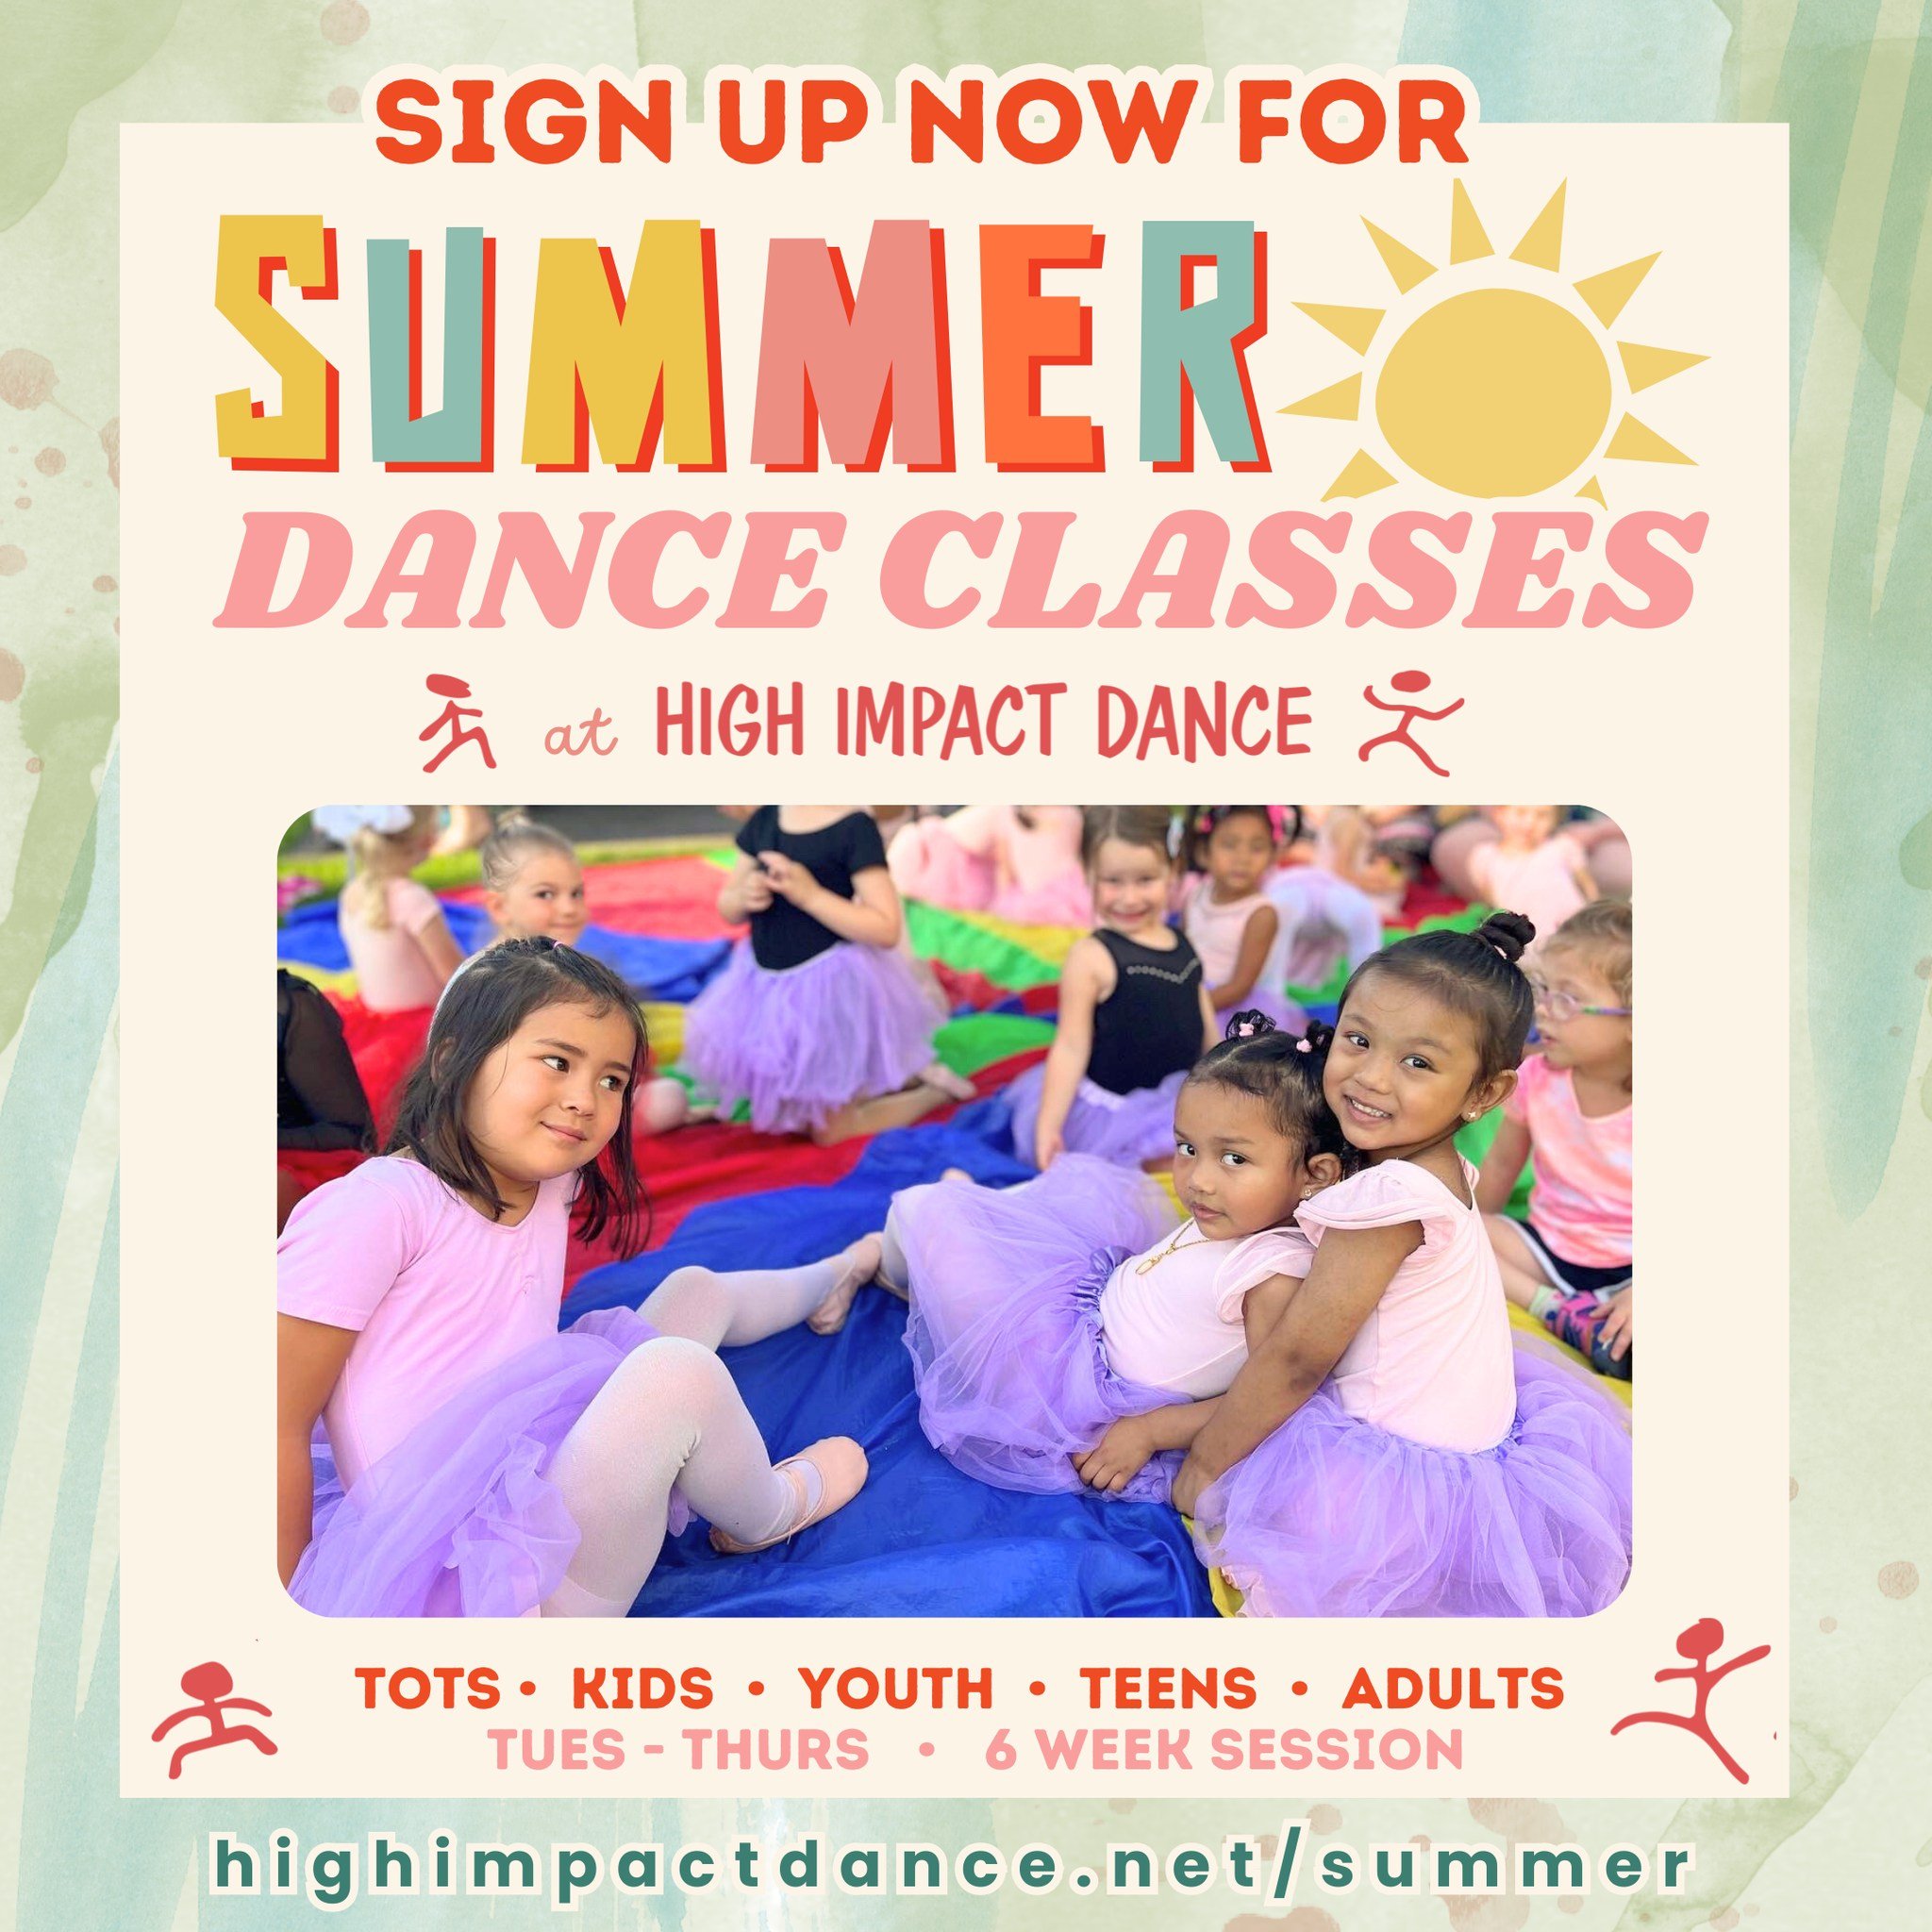 The HID summer lineup is looking HOT! ☀️✨ From weekly classes to intensive workshops and beyond, High Impact Dance has something for the whole family. And while fun is definitely a priority, the benefits go beyond staying busy &amp; having fun! 

Dan